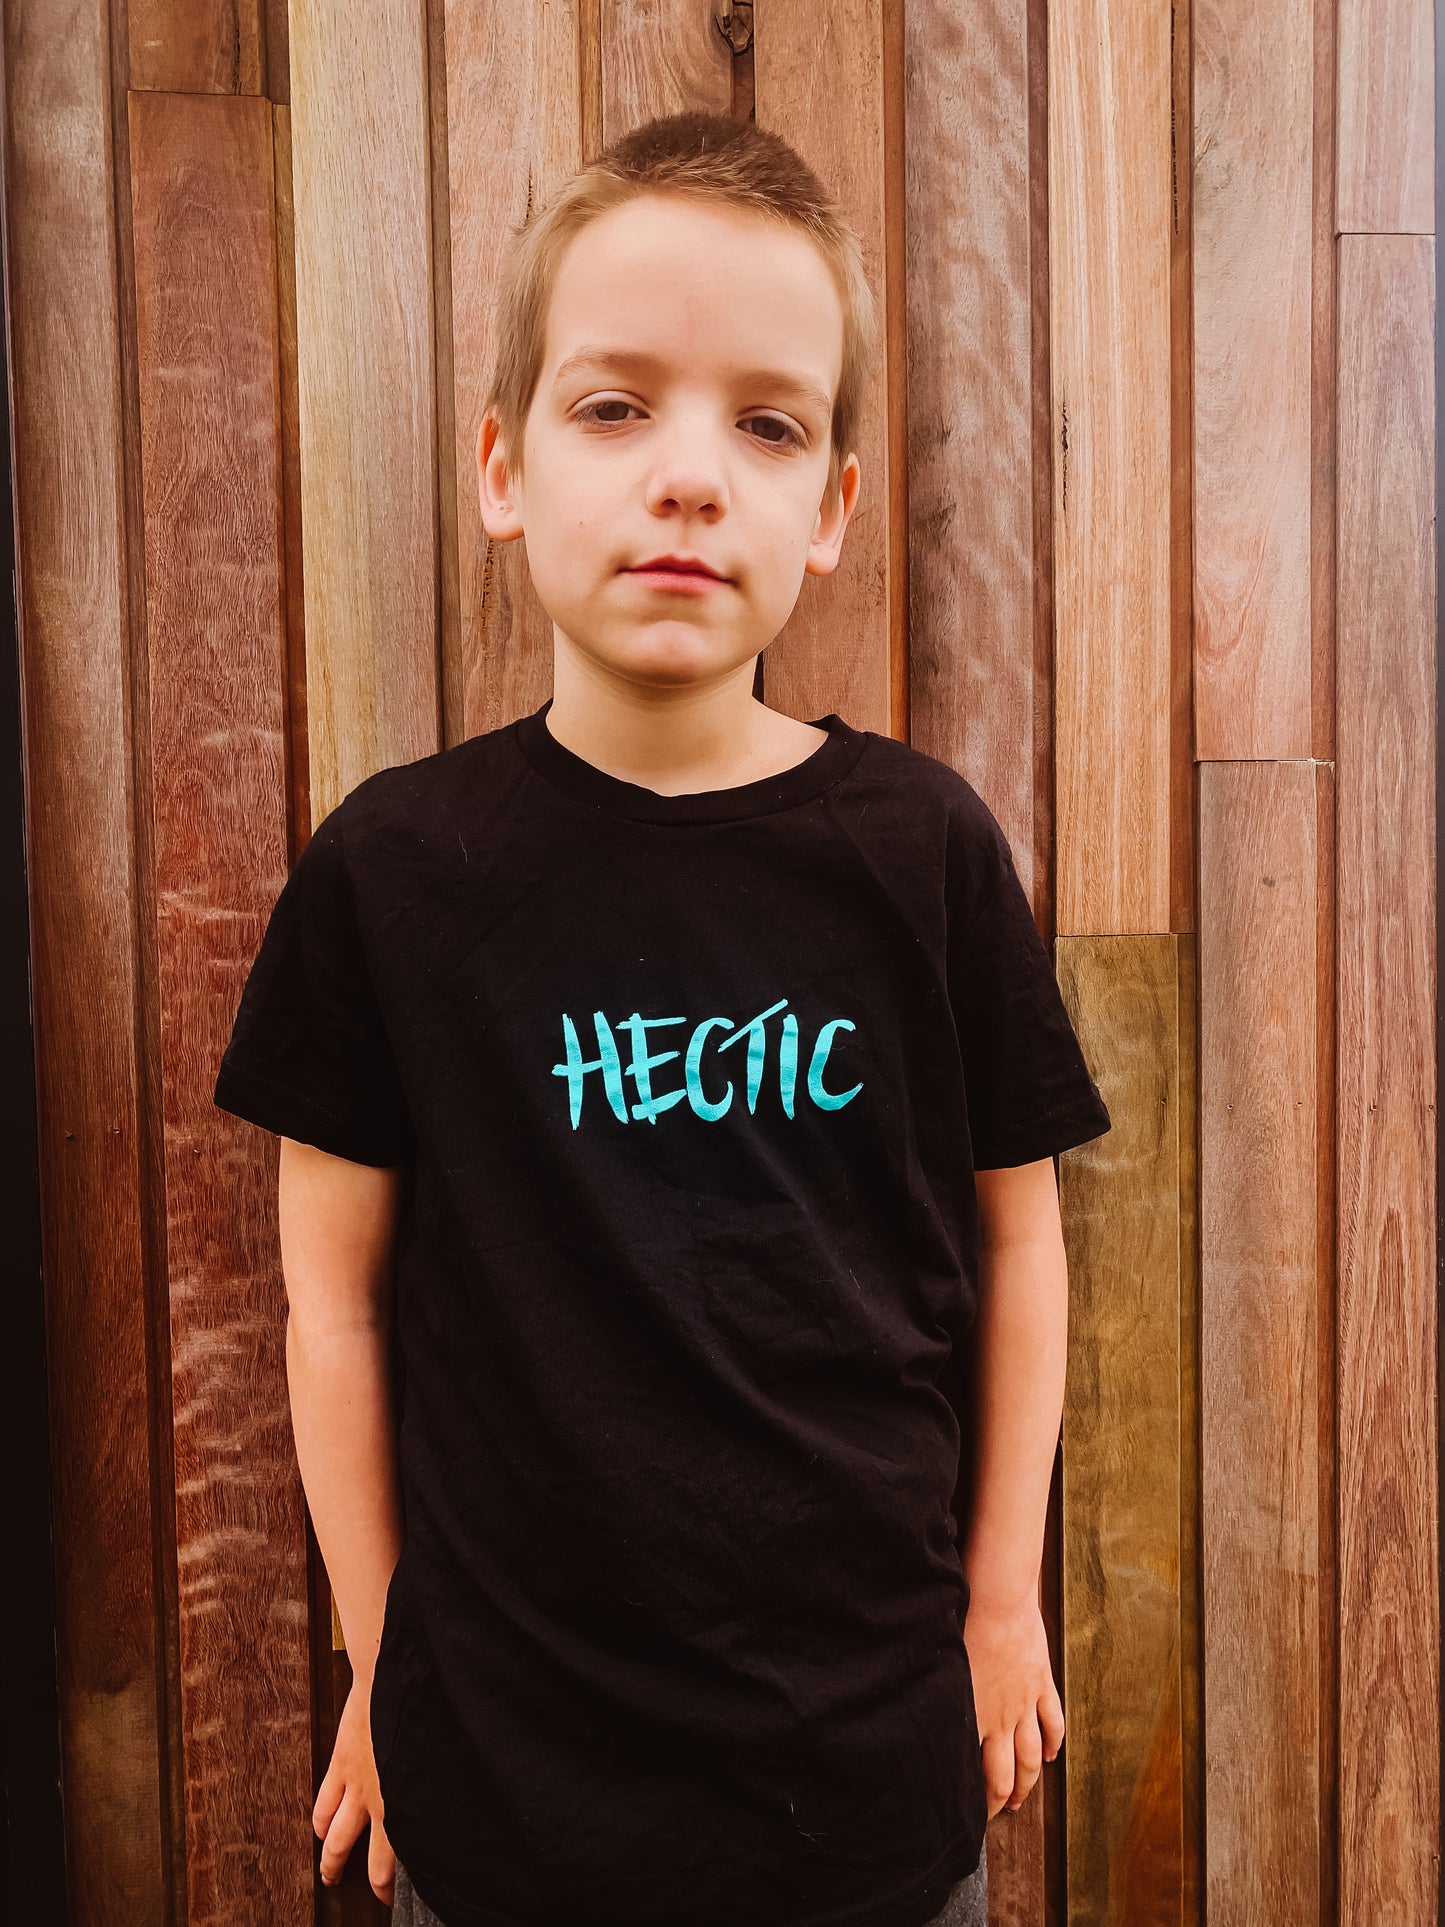 Kids / Youth Hectic Short Sleeve T-shirt - Teal Print